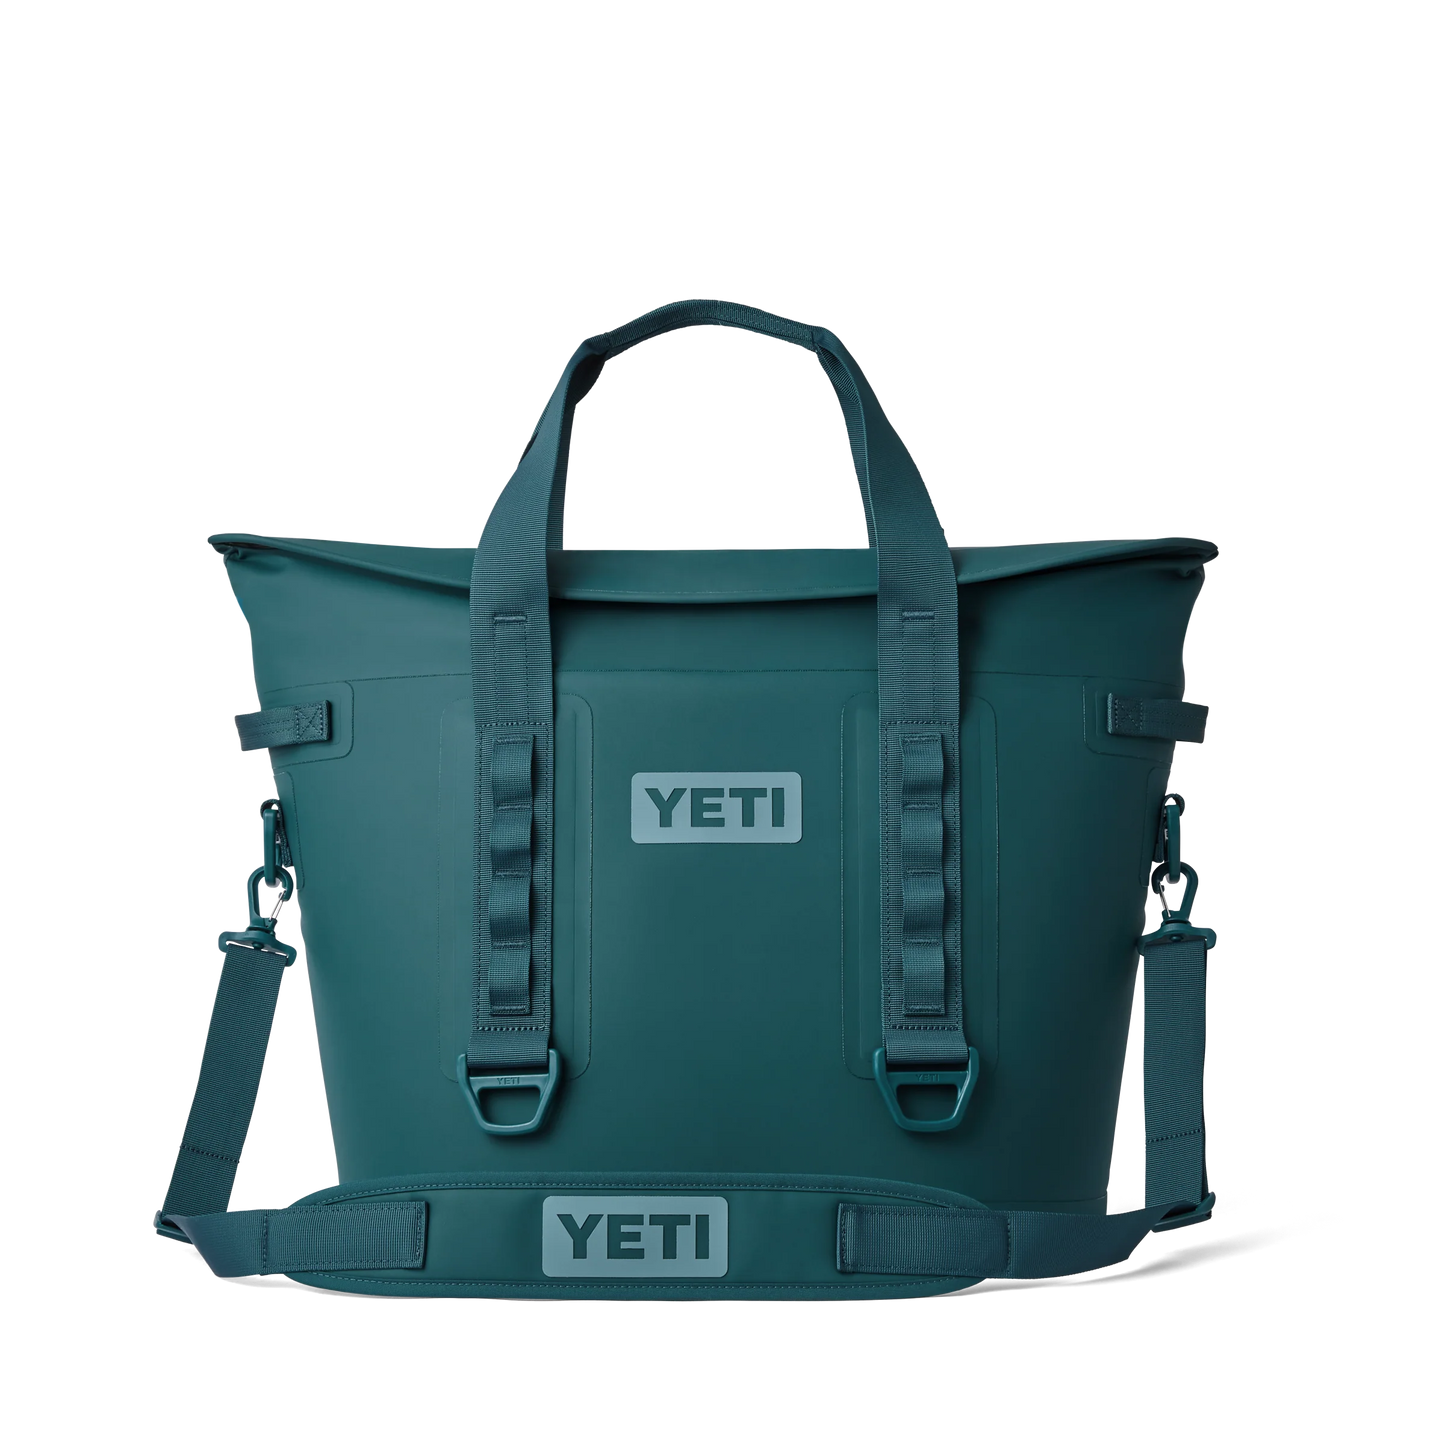 Yeti Hopper M30 Soft Cooler-Coolers & Drinkware-Yeti-Agave Teal-Fishing Station